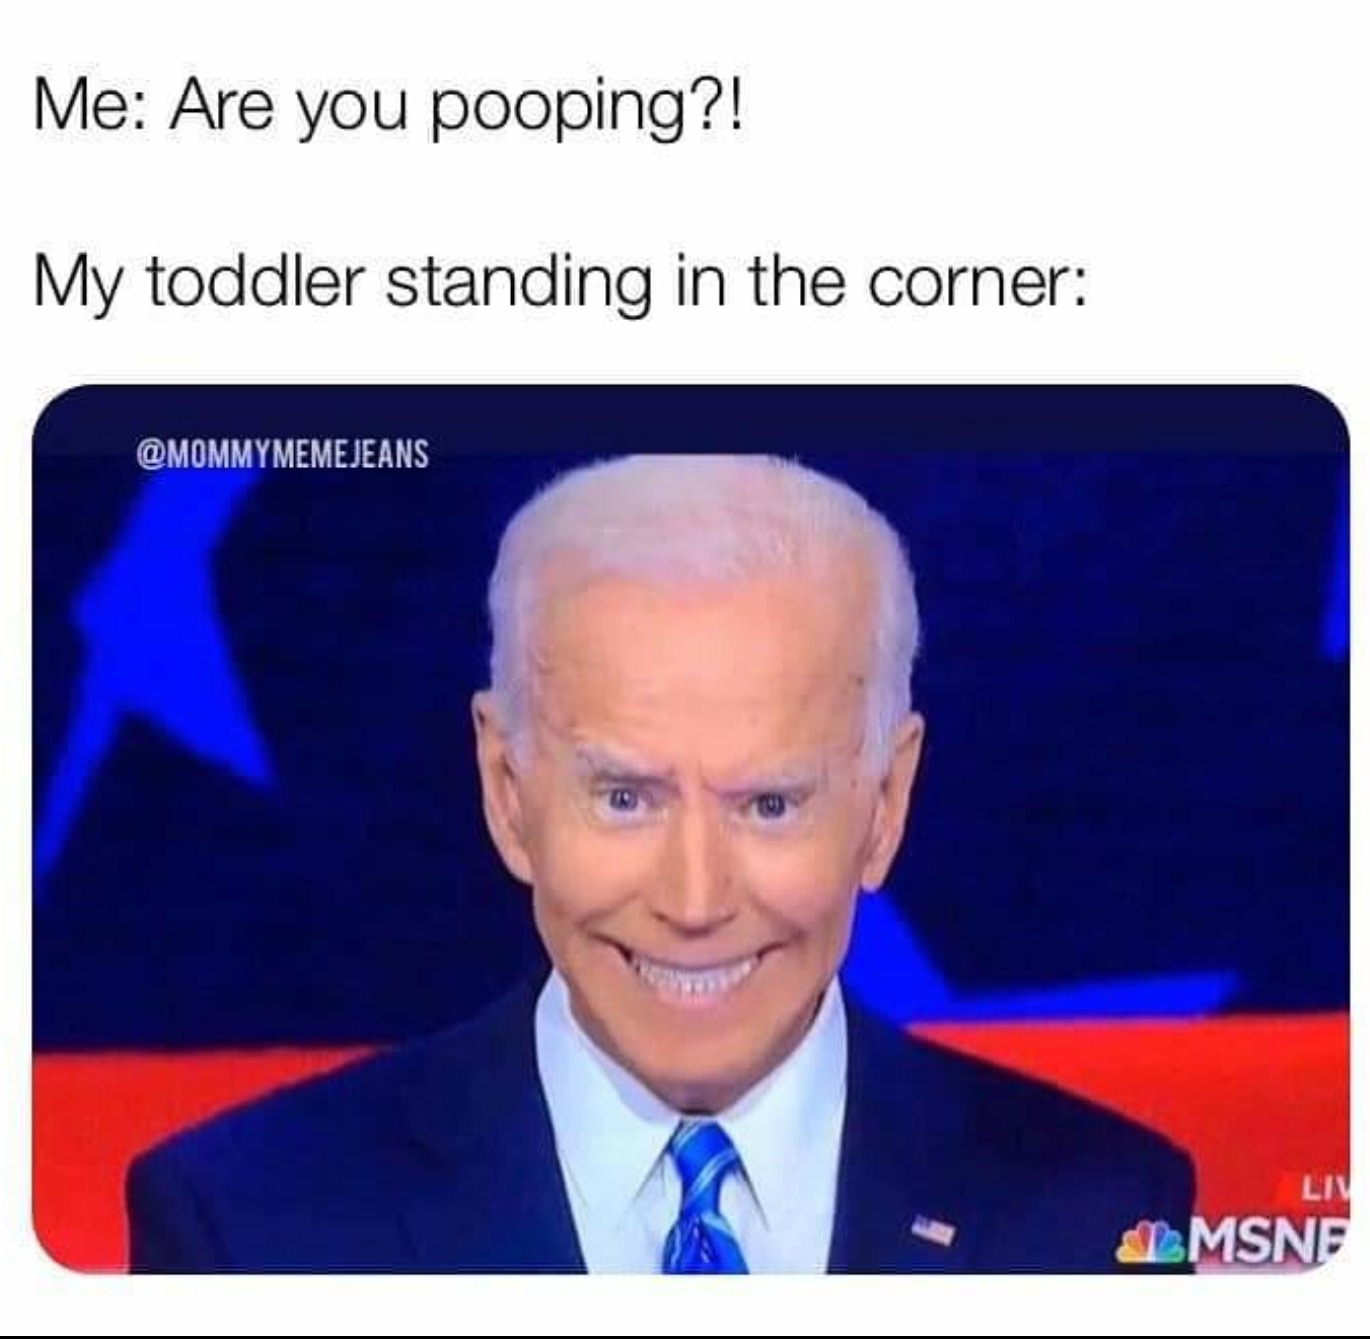 Joe Biden - Me Are you pooping?! My toddler standing in the corner Liv Imsne